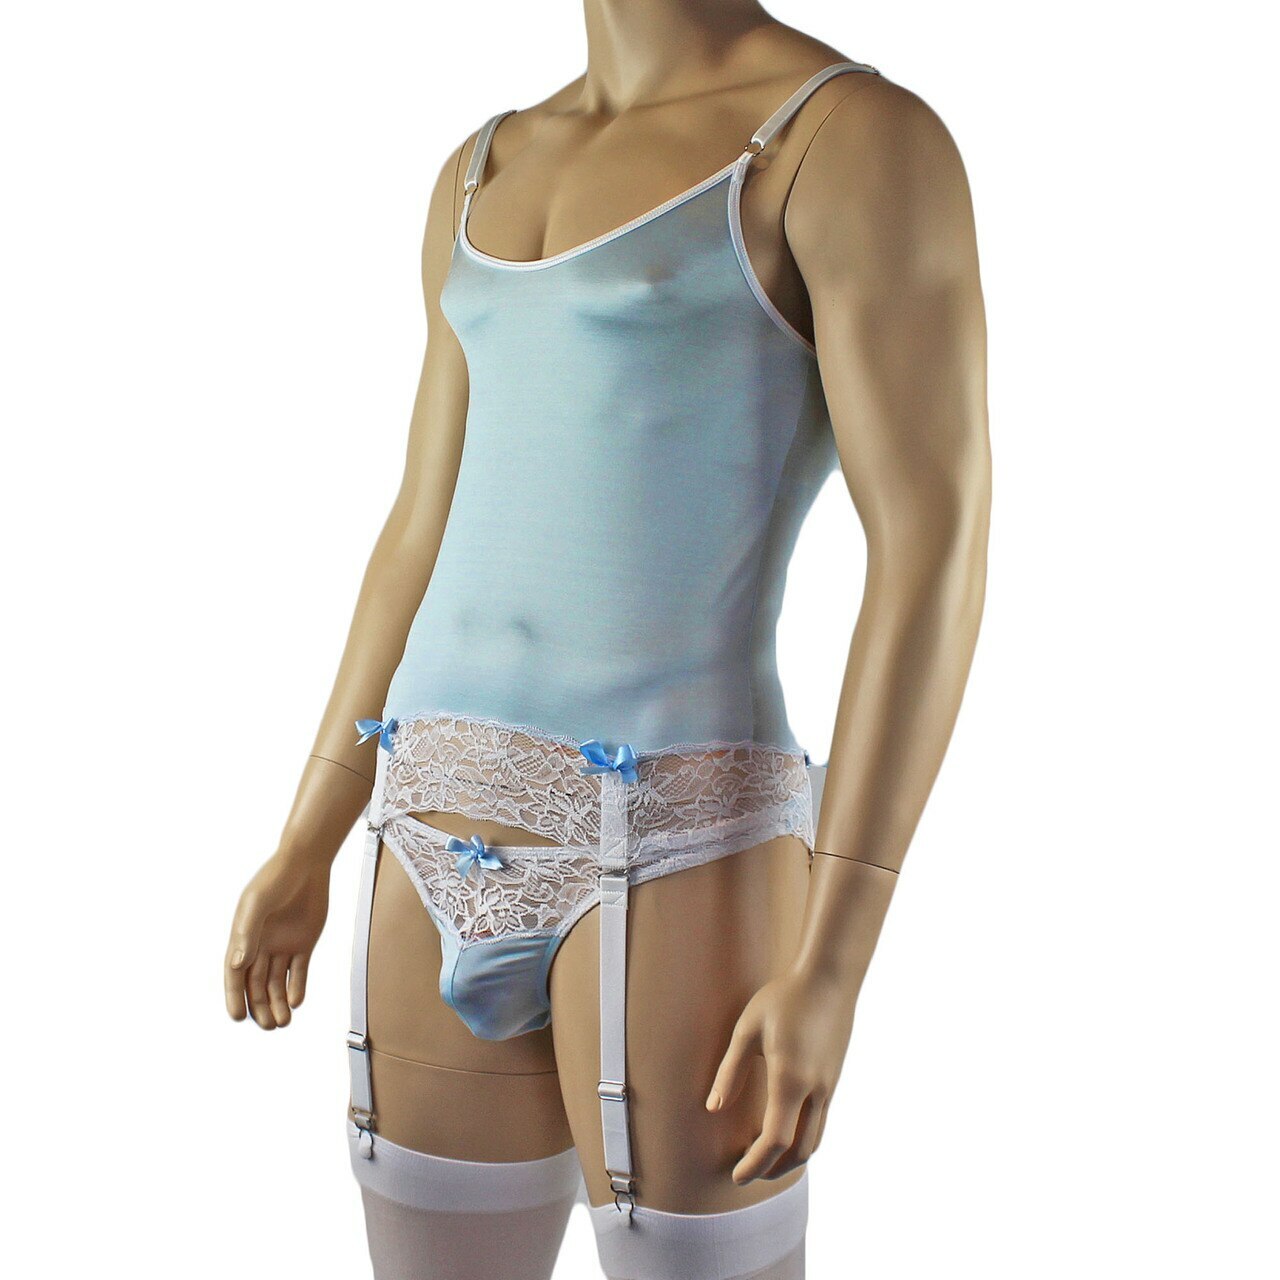 Mens Camisole Bustier Garter Top with Thong & Stockings (light blue plus other colours)